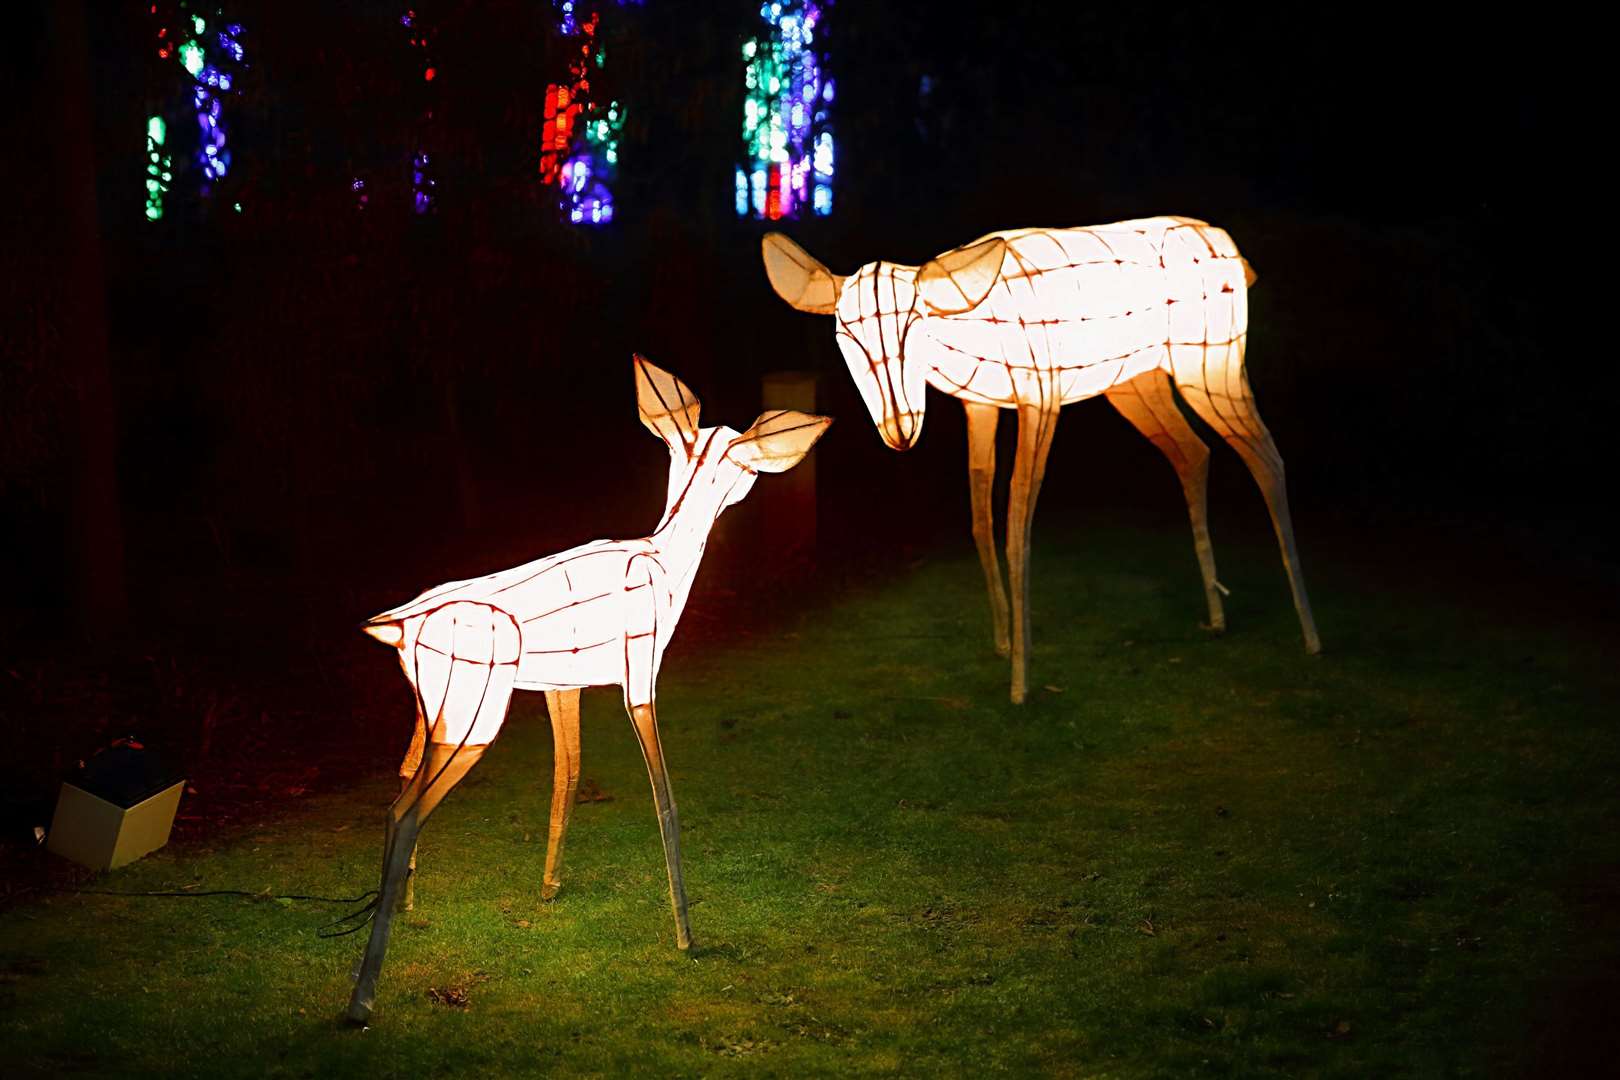 There were various installations including woodland animals and cityscapes. Picture: Cohesion Plus